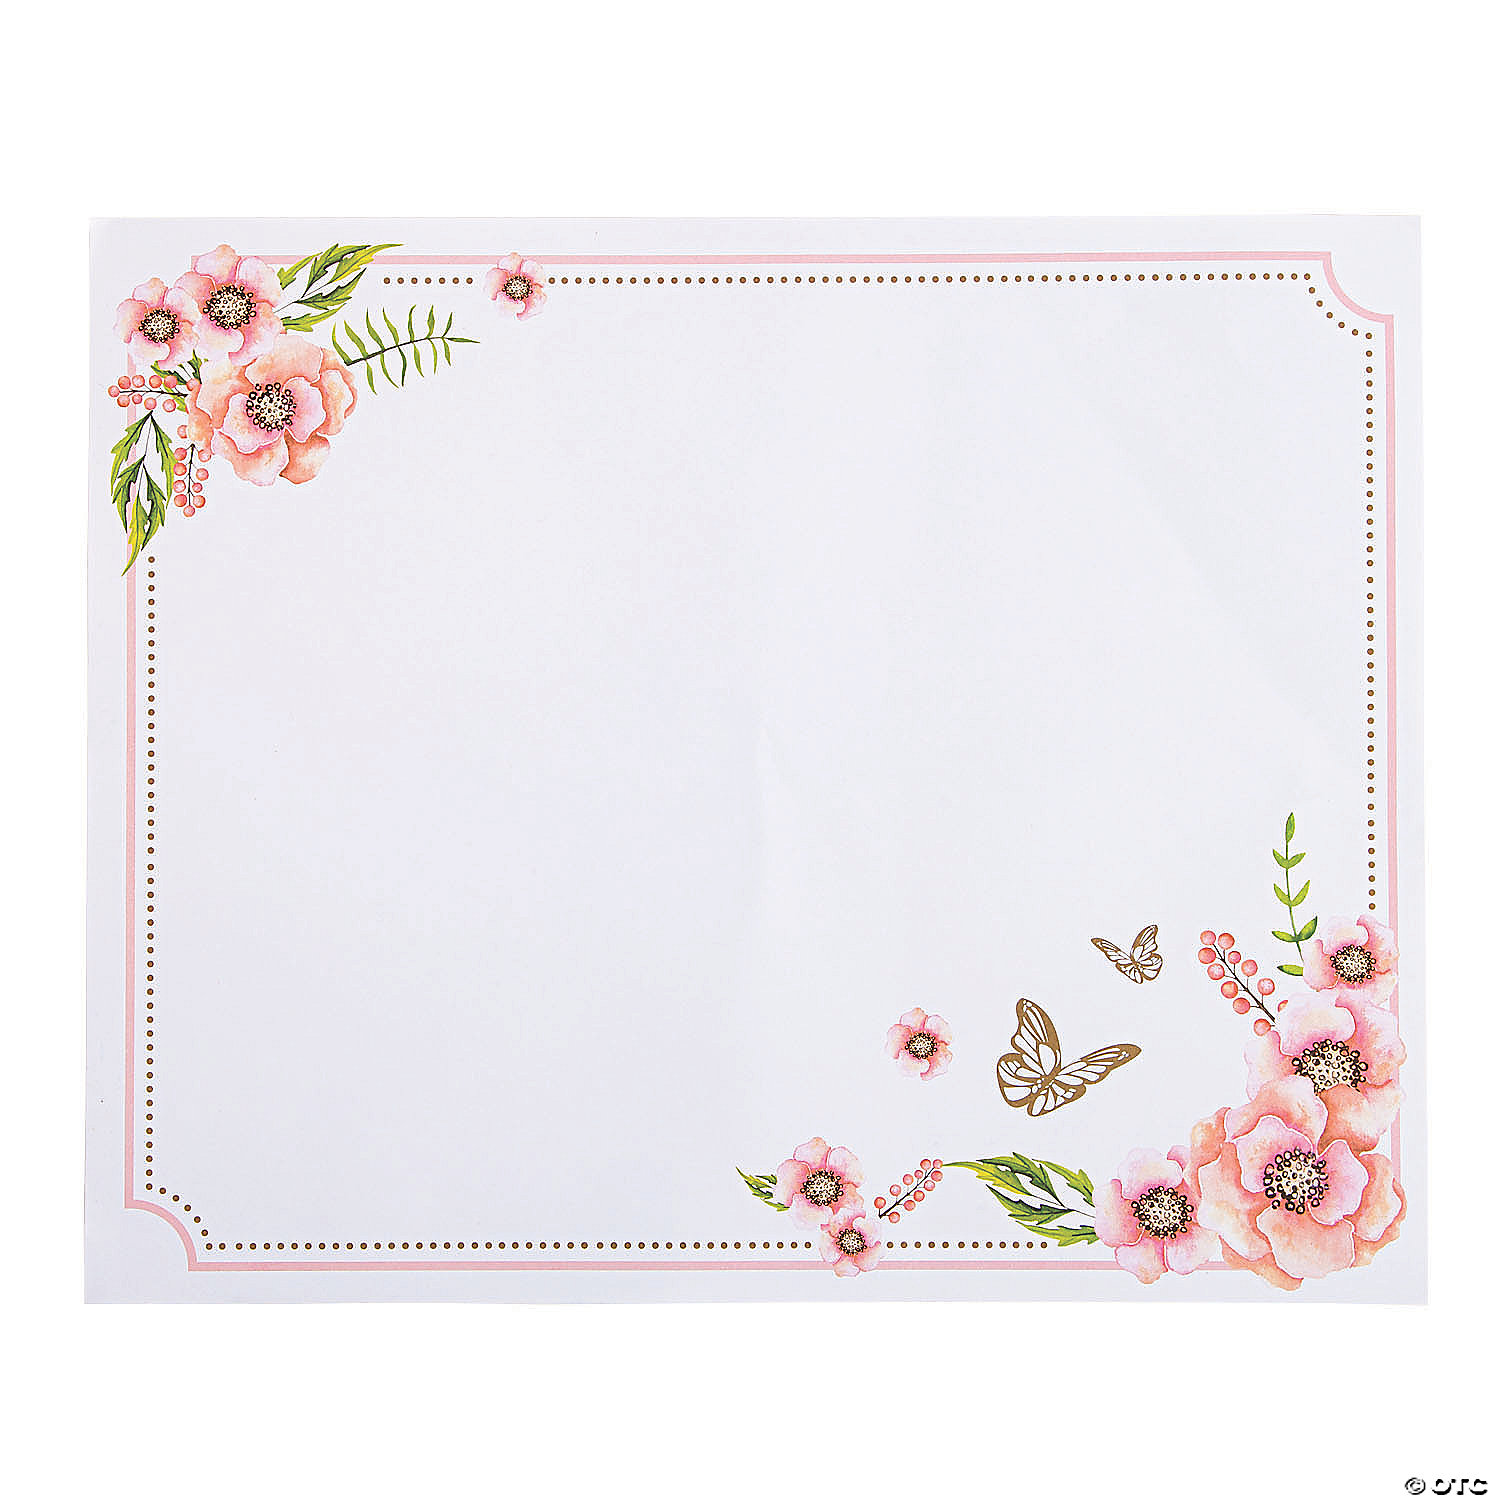 Set of 4 Placemats Coasters Table Place Settings Mats Butterfly Floral Flowers 